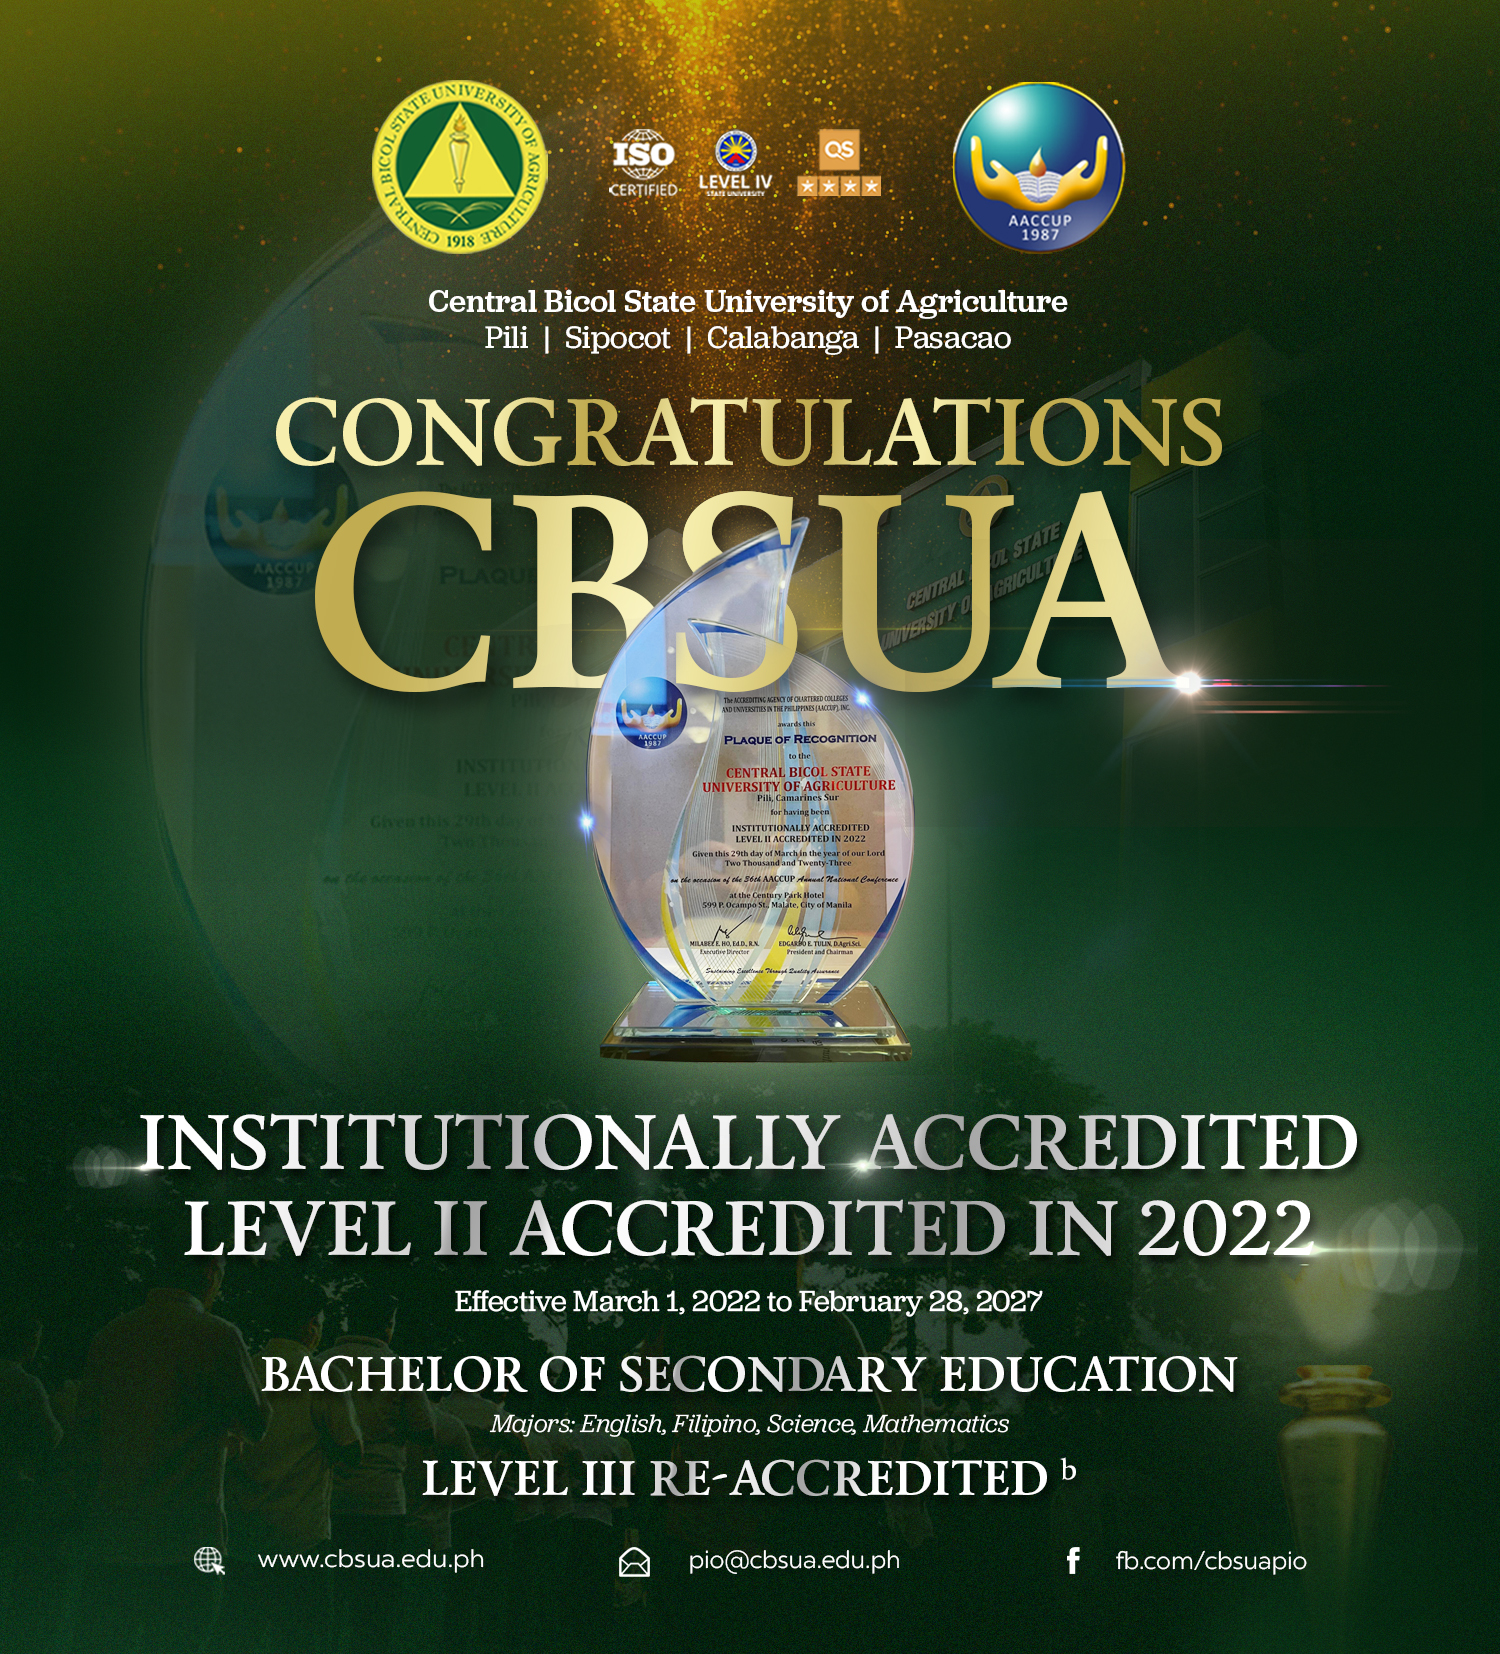 CBSUA INSTITUTIONALLY ACCREDITED LEVEL II BY AACCUP; CDE PILI CAMPUS ACHIEVES LEVEL III RE-ACCREDITED STATUS FOR BSED MAJORS